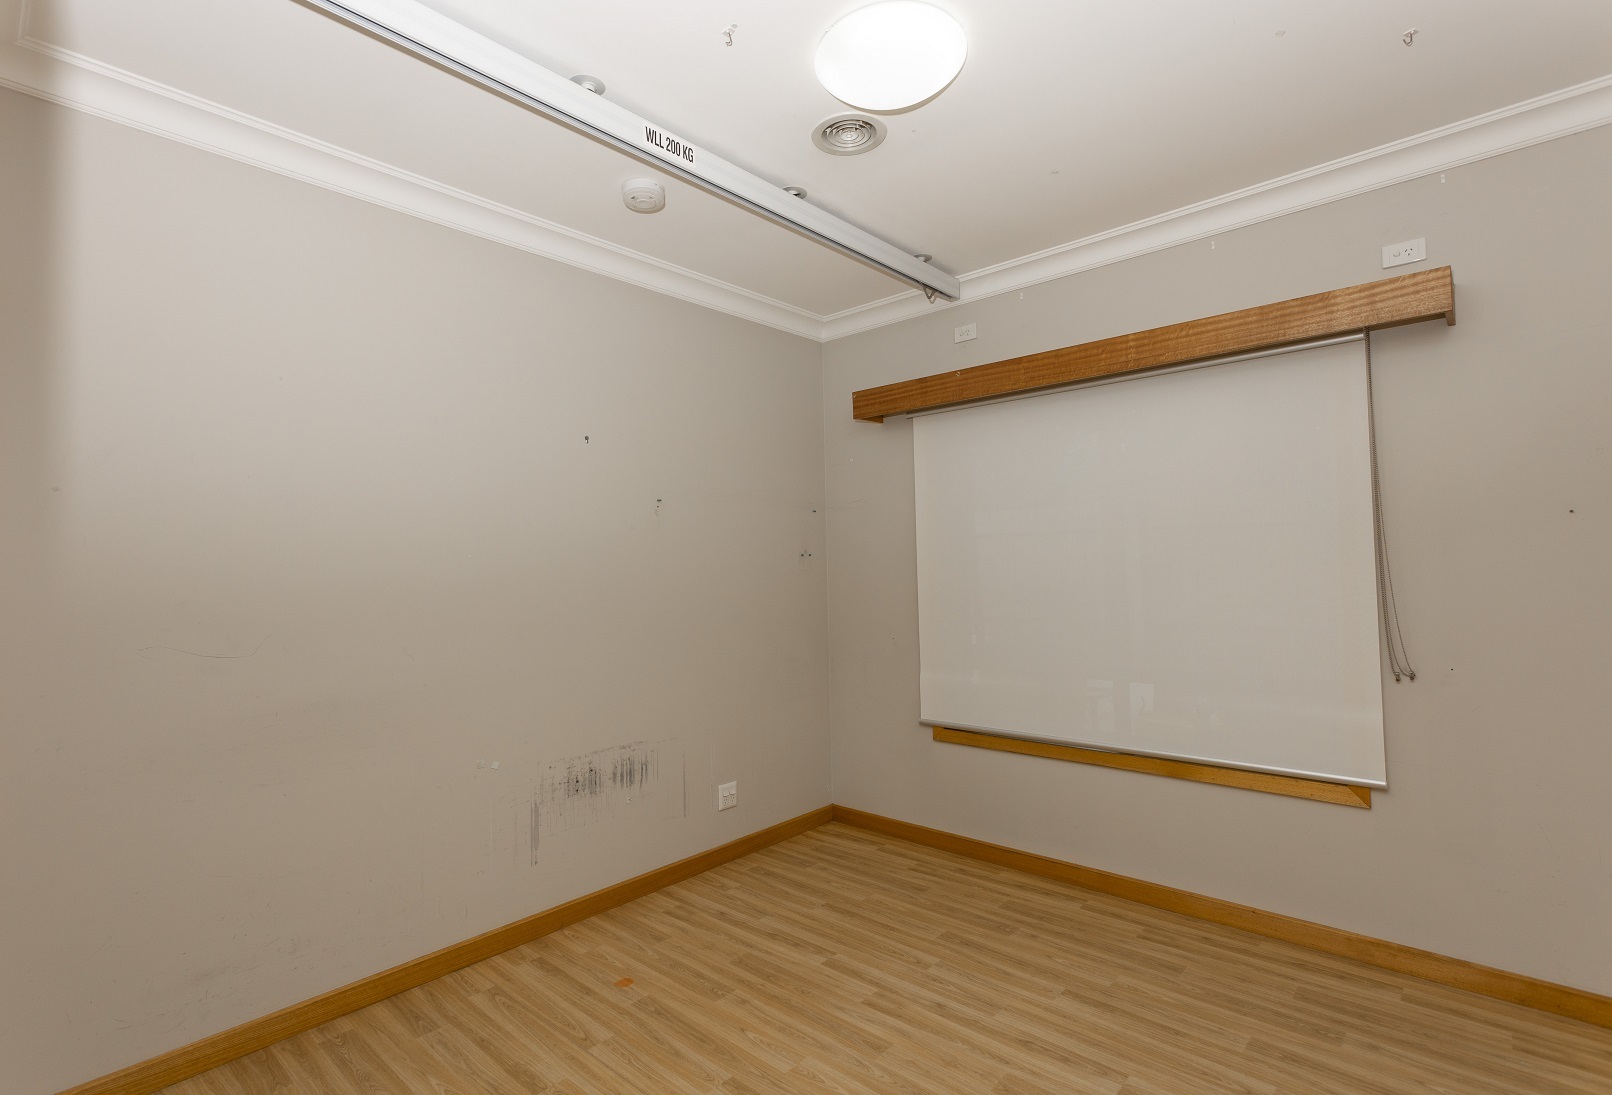 Bedroom with ceiling track and wooden floorboards